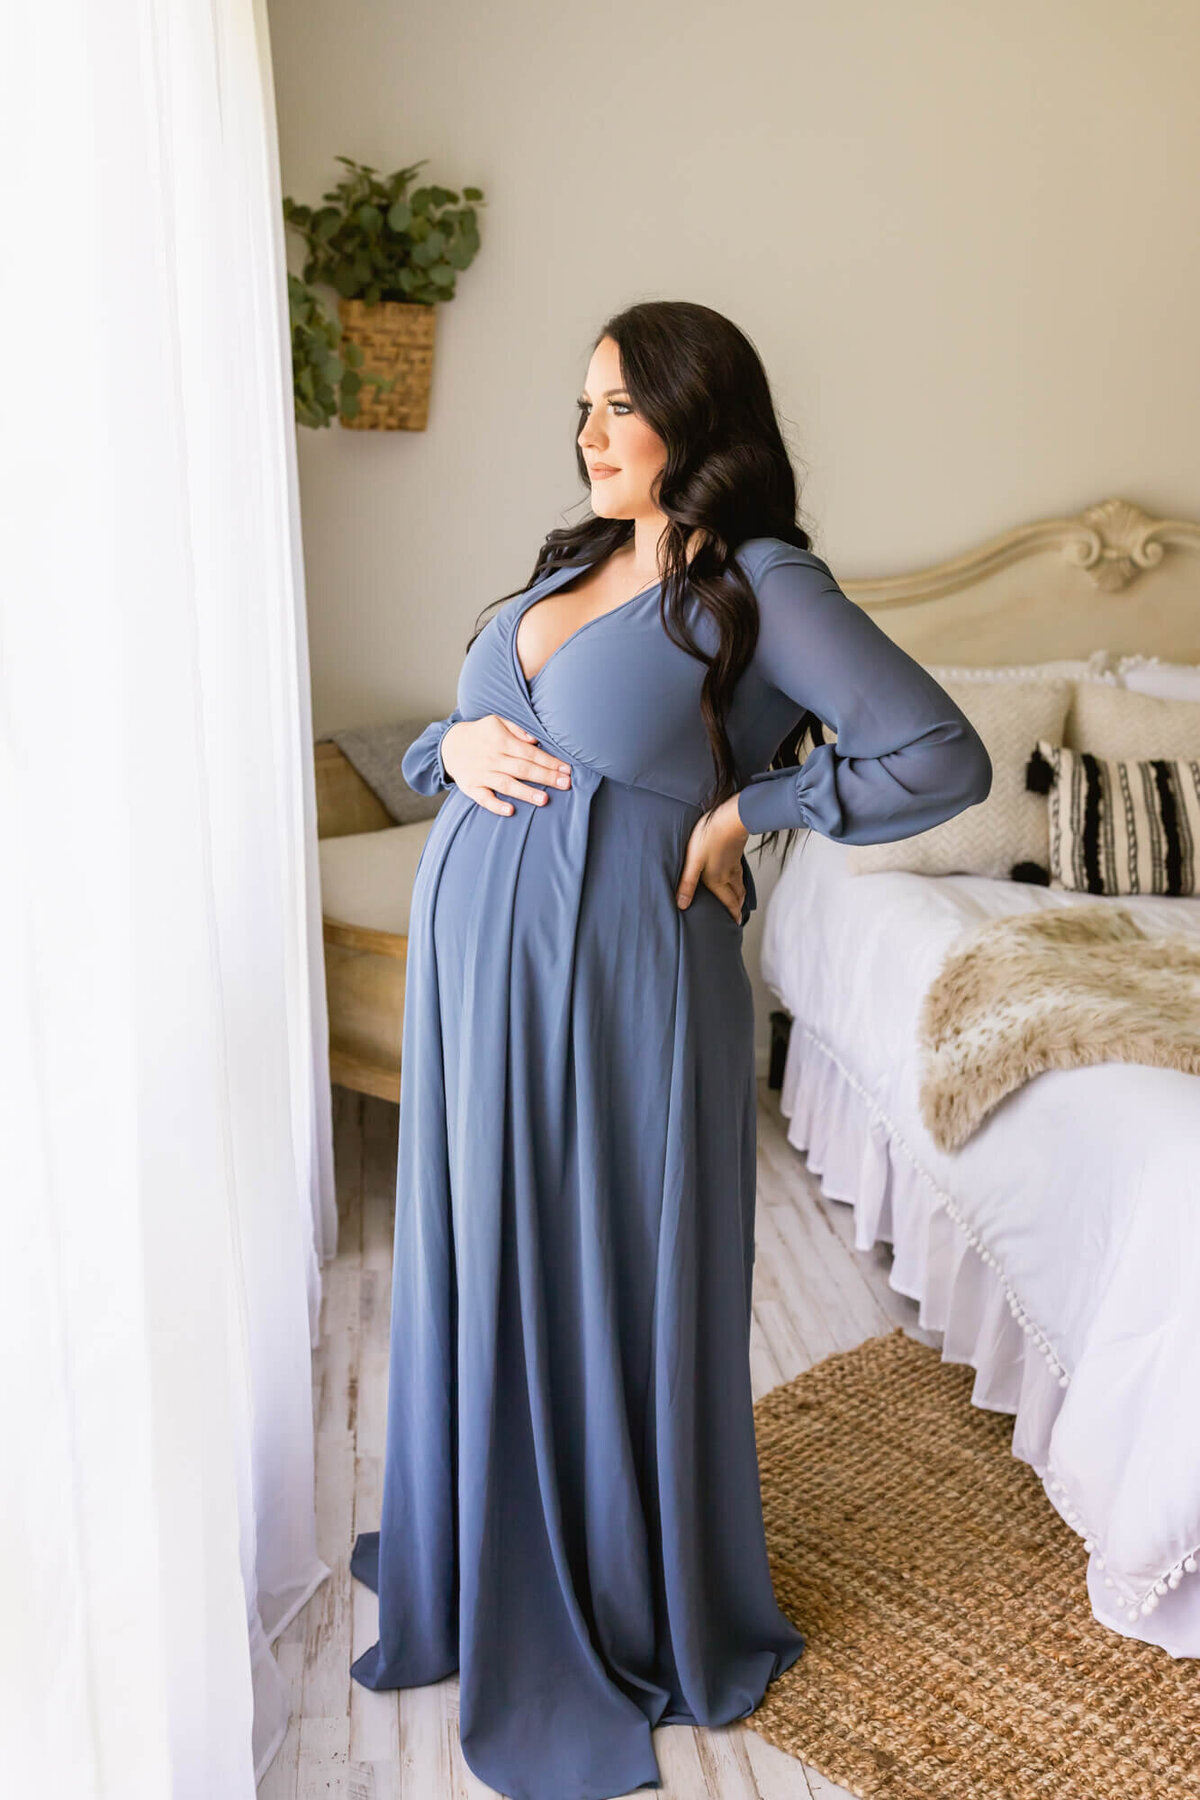 Mother to be in a blue dress looks out the window while caressing her belly